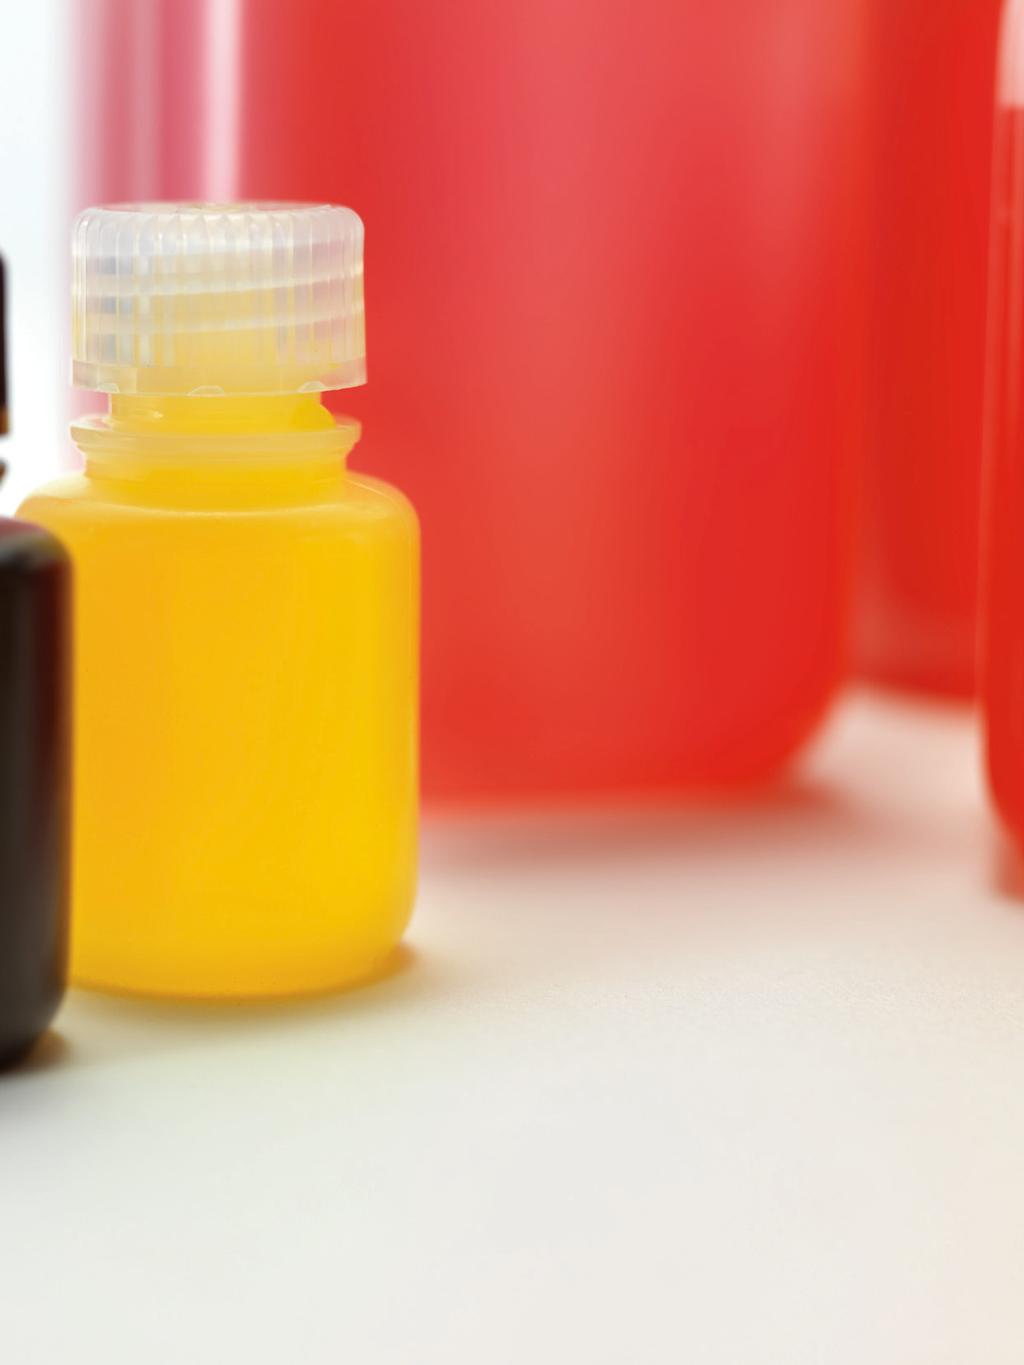 Thermo Scientific Nalgene packaging bottles set the standard for superior quality, extensive resin and product selection, and comprehensive worldwide support.